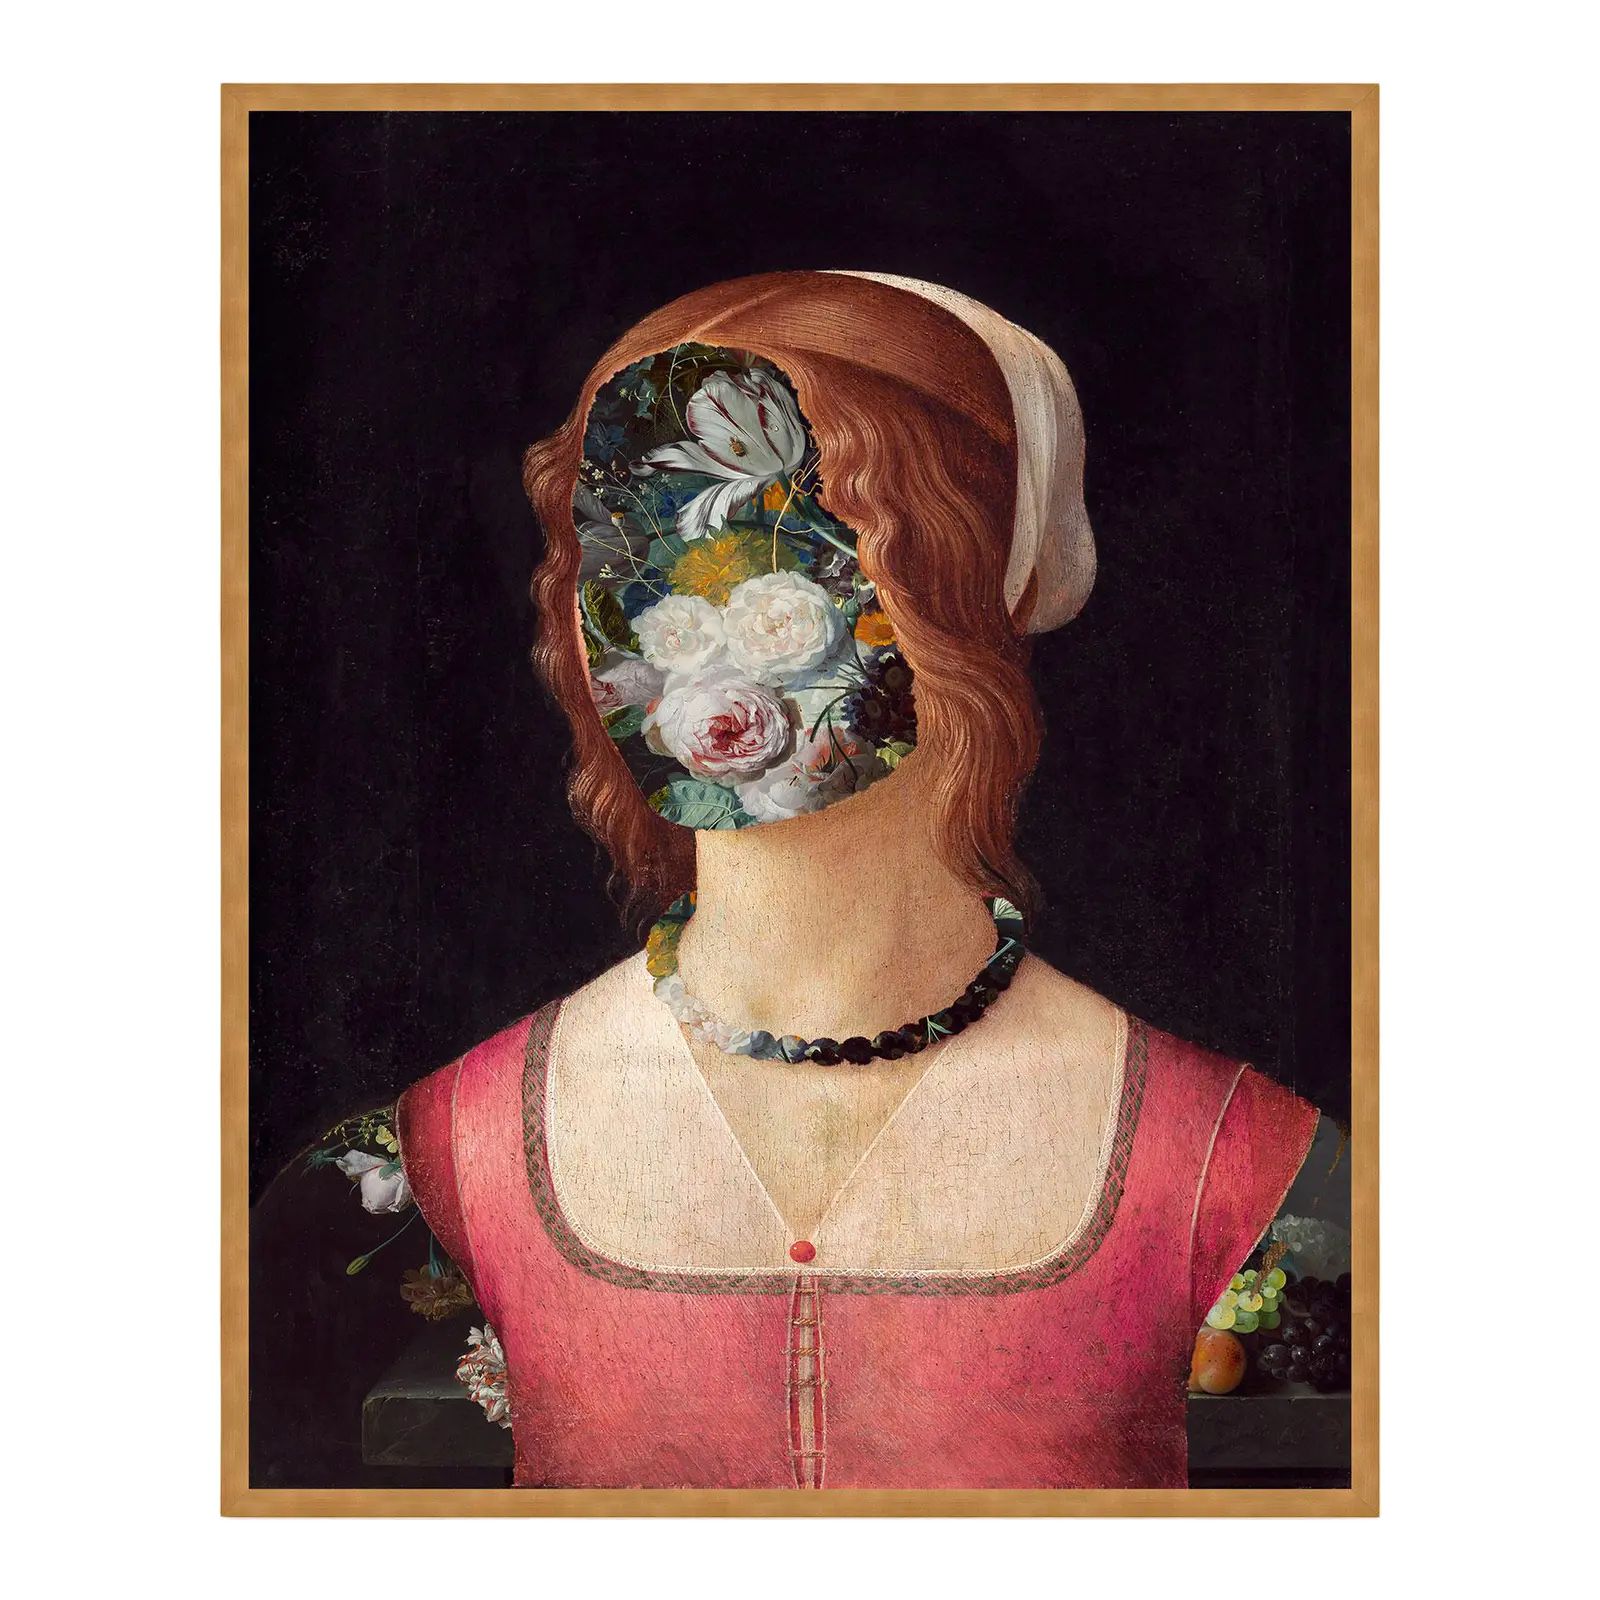 Flower Face 2 by Lara Fowler in Gold Frame, Large Art Print | Chairish